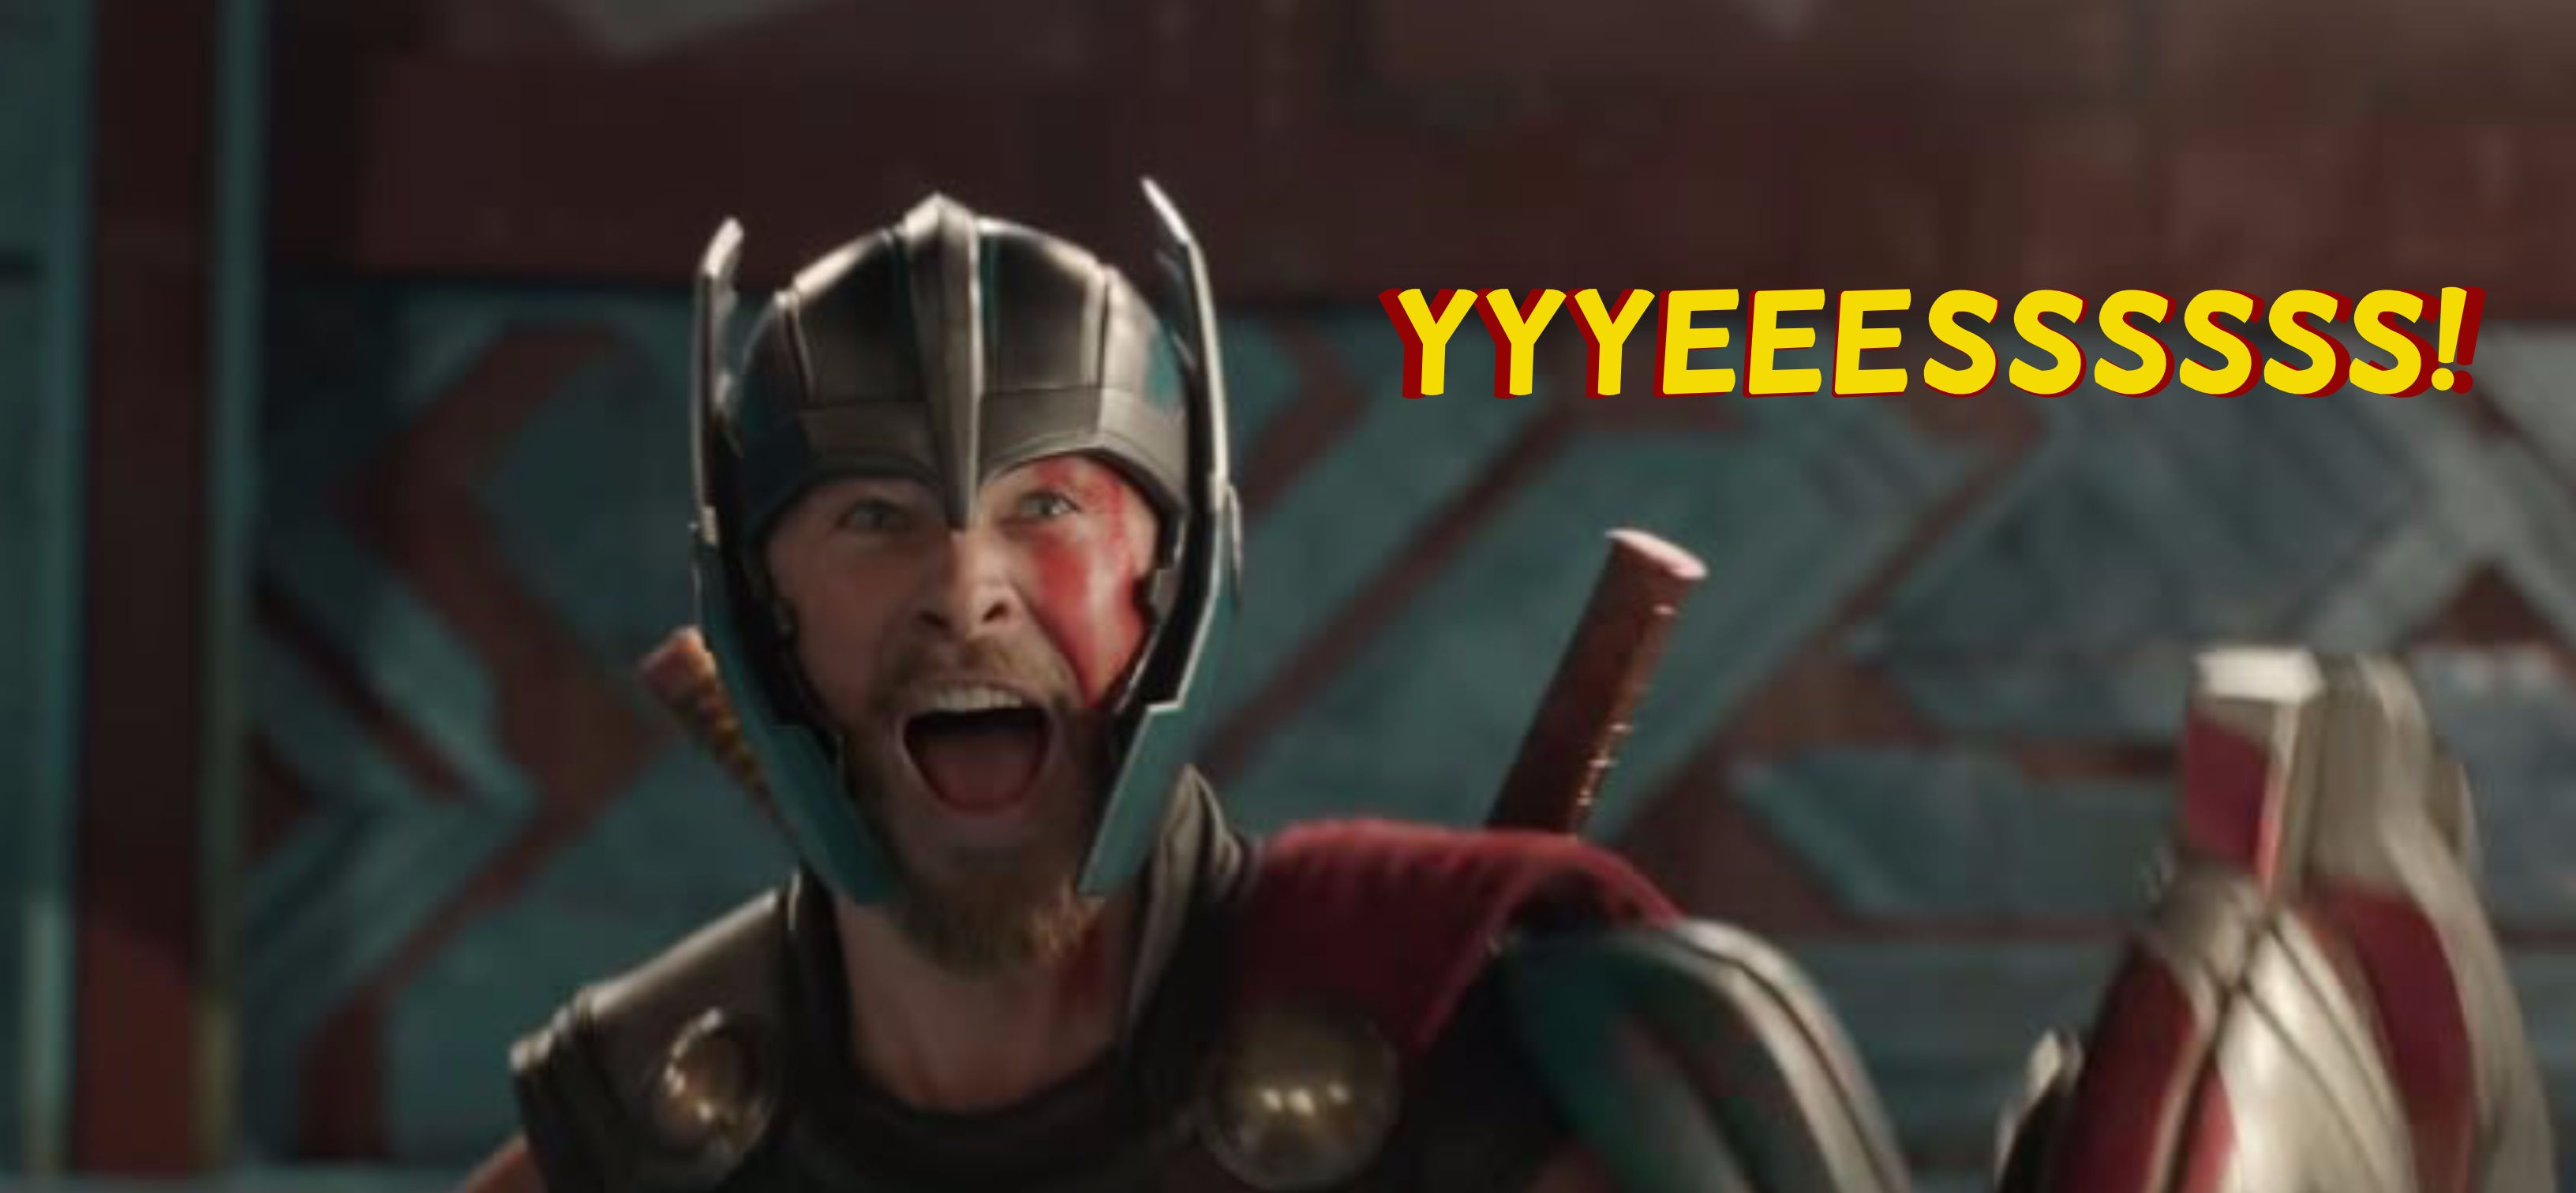 Taika Waititi Is Returning to Direct ‘Thor 4’ and Marvel Fans are Freaking Out